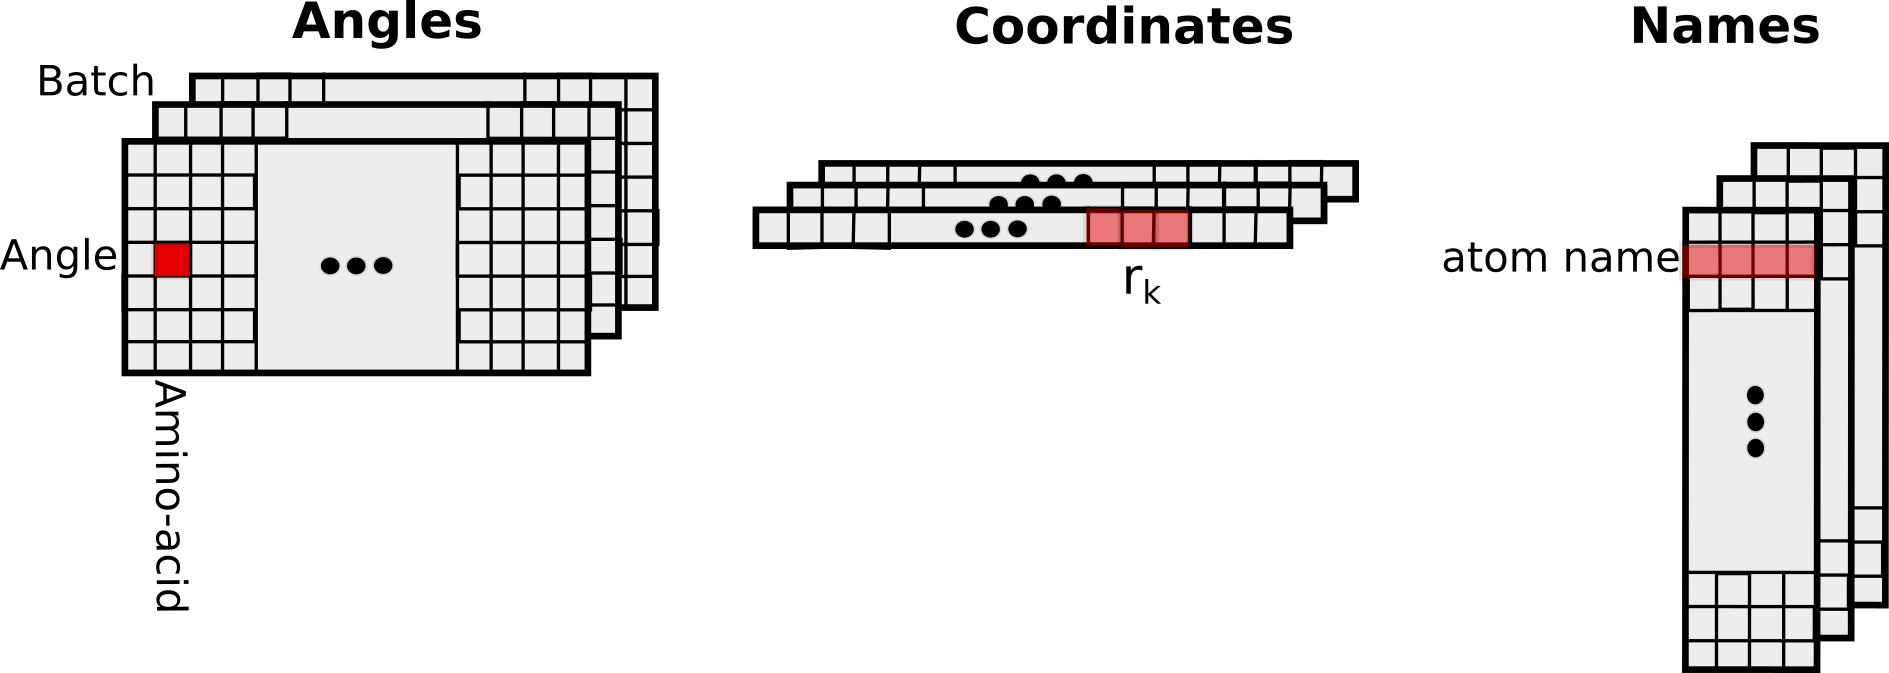 Figure 4: Structure of input and output tensors